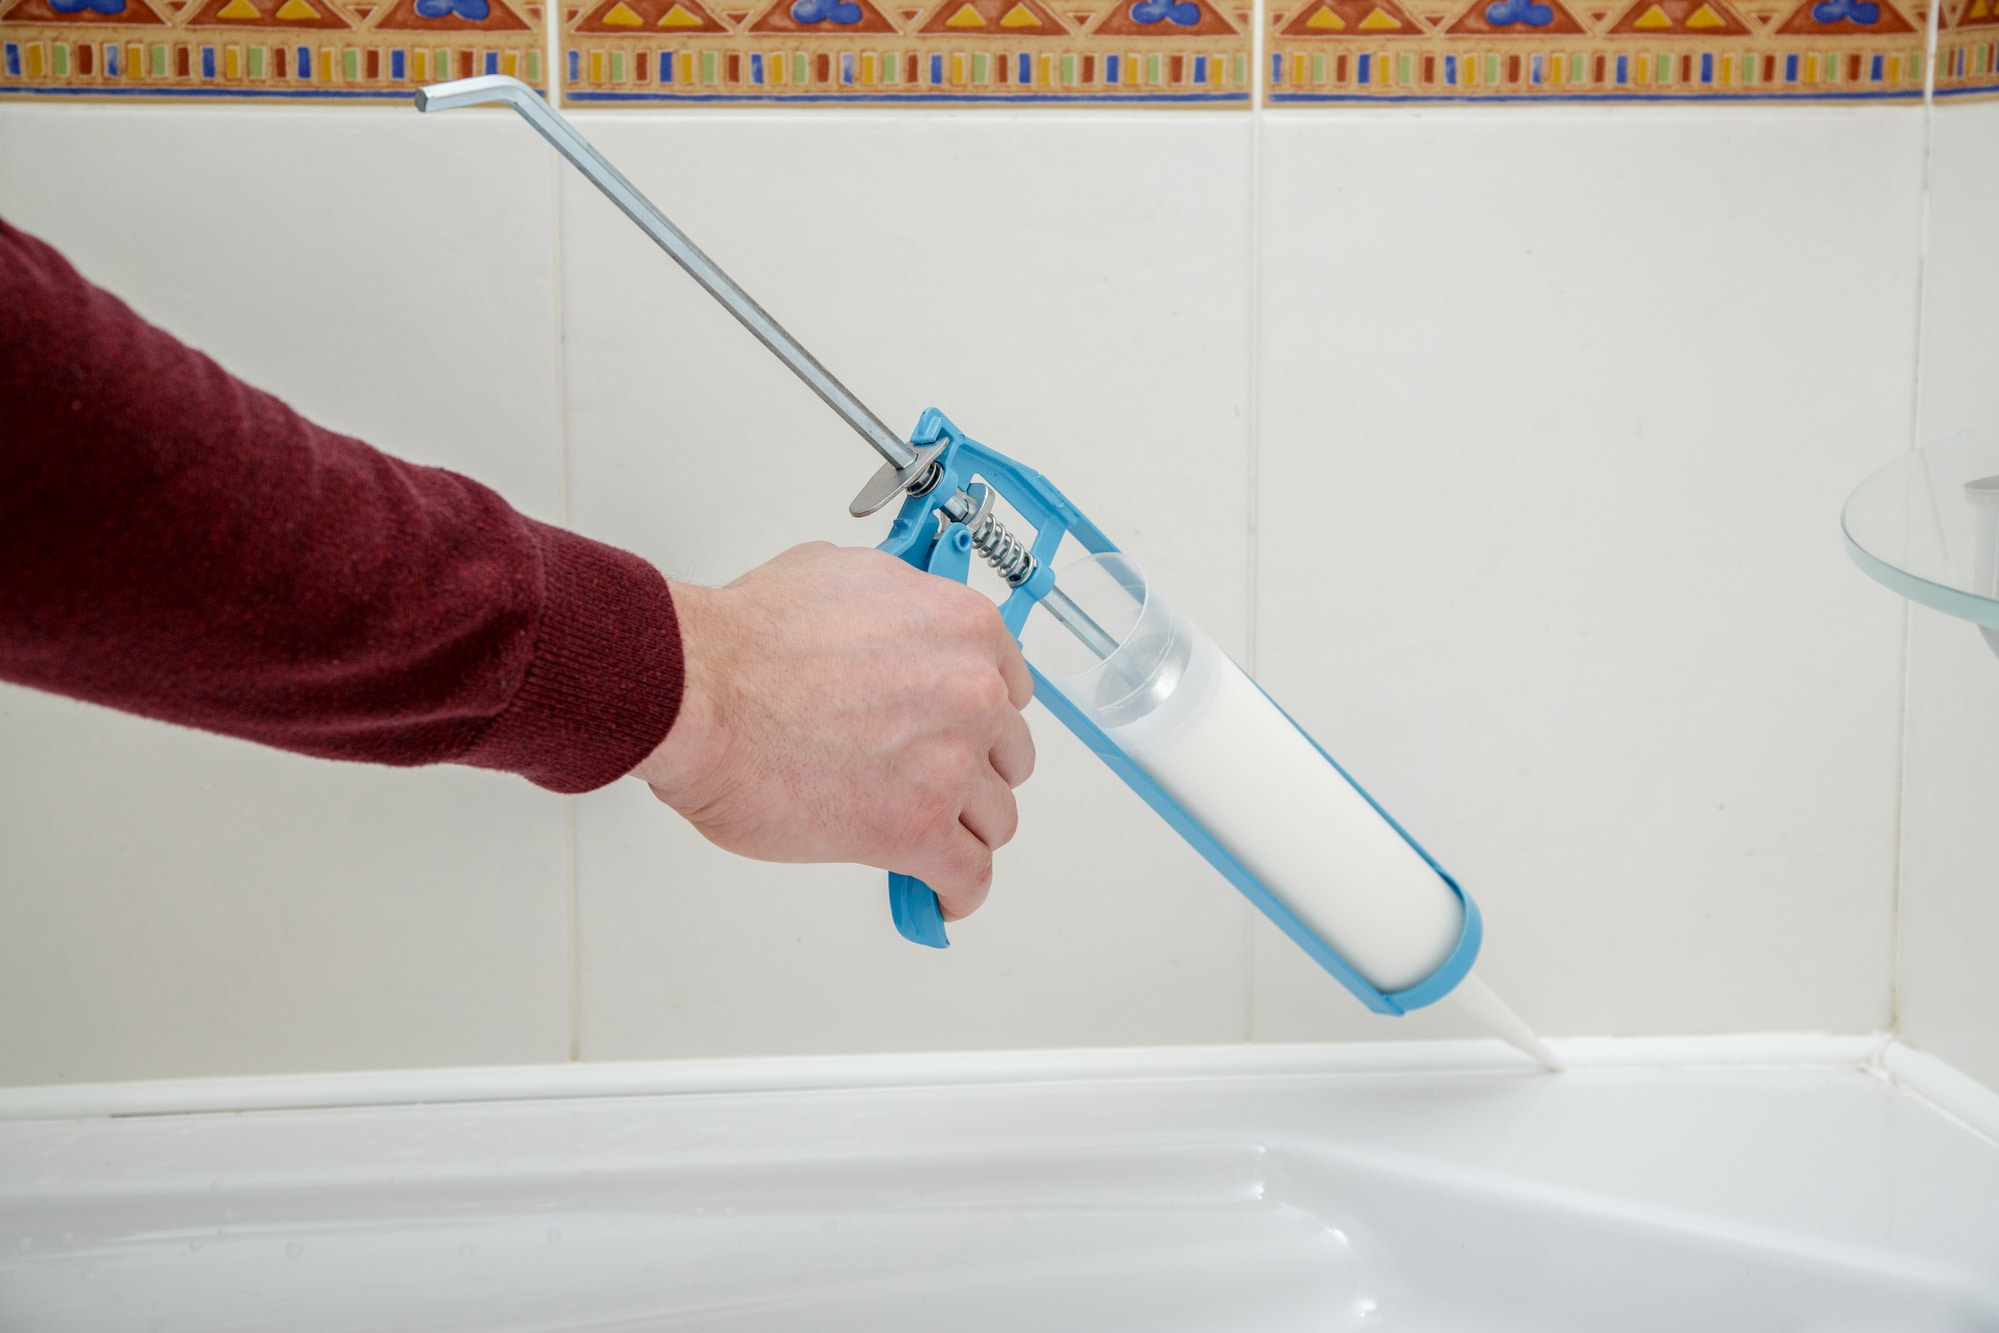 Top 5 Plumbing Products to Help Save Water in 2022